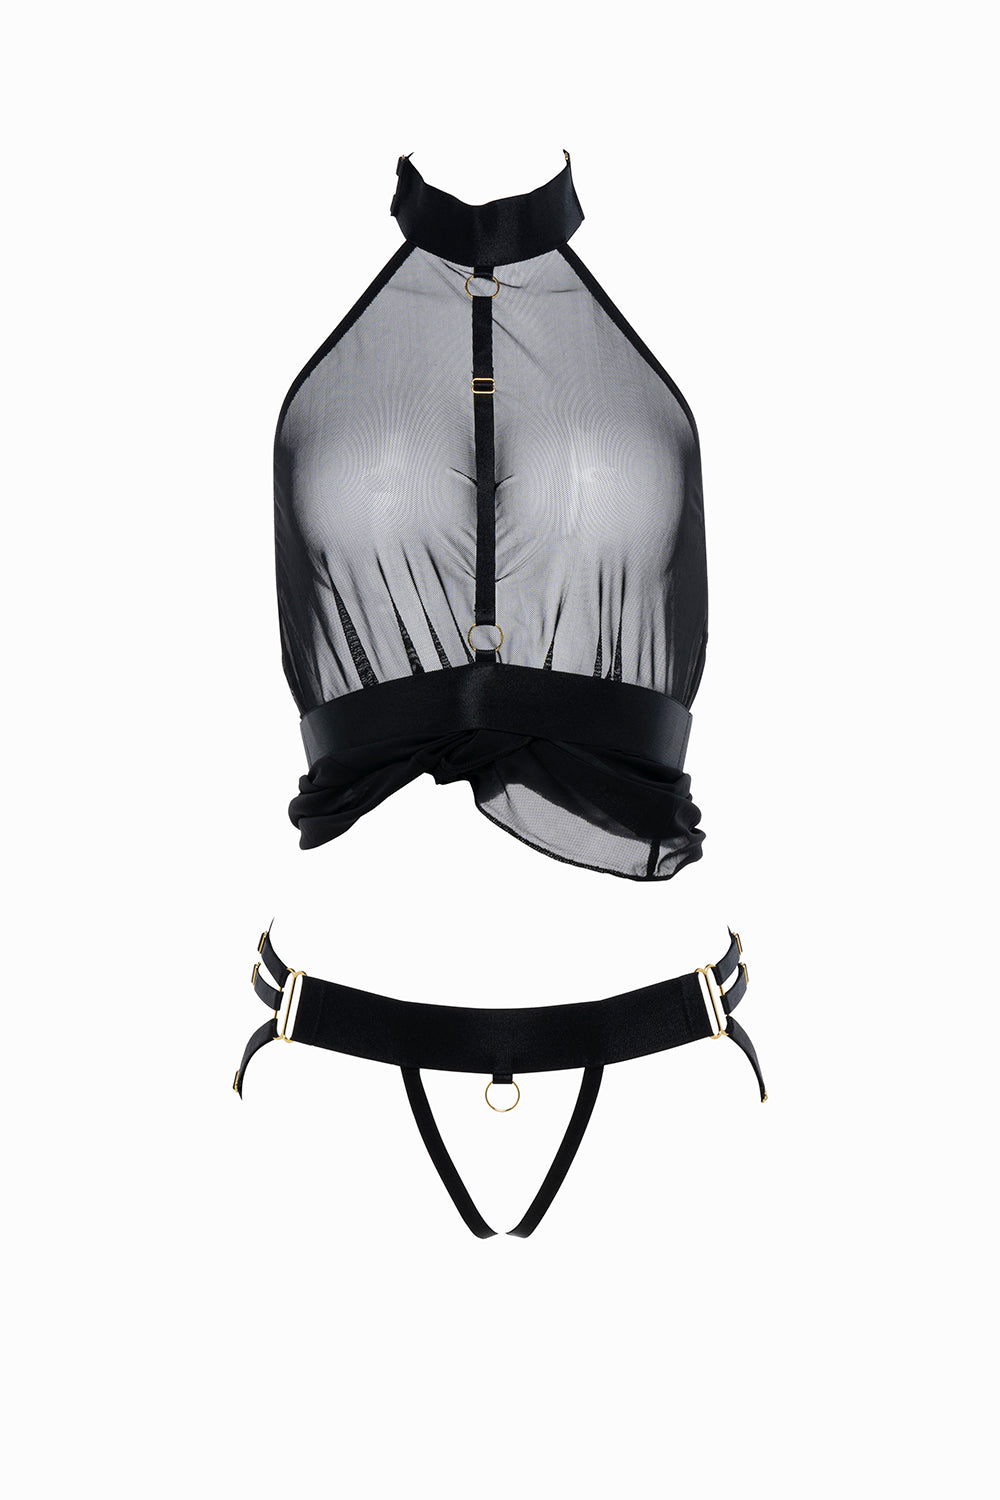 Allure Adore Be My Baby Sheer Mesh Harness Babydoll & Open Panty Black One Size